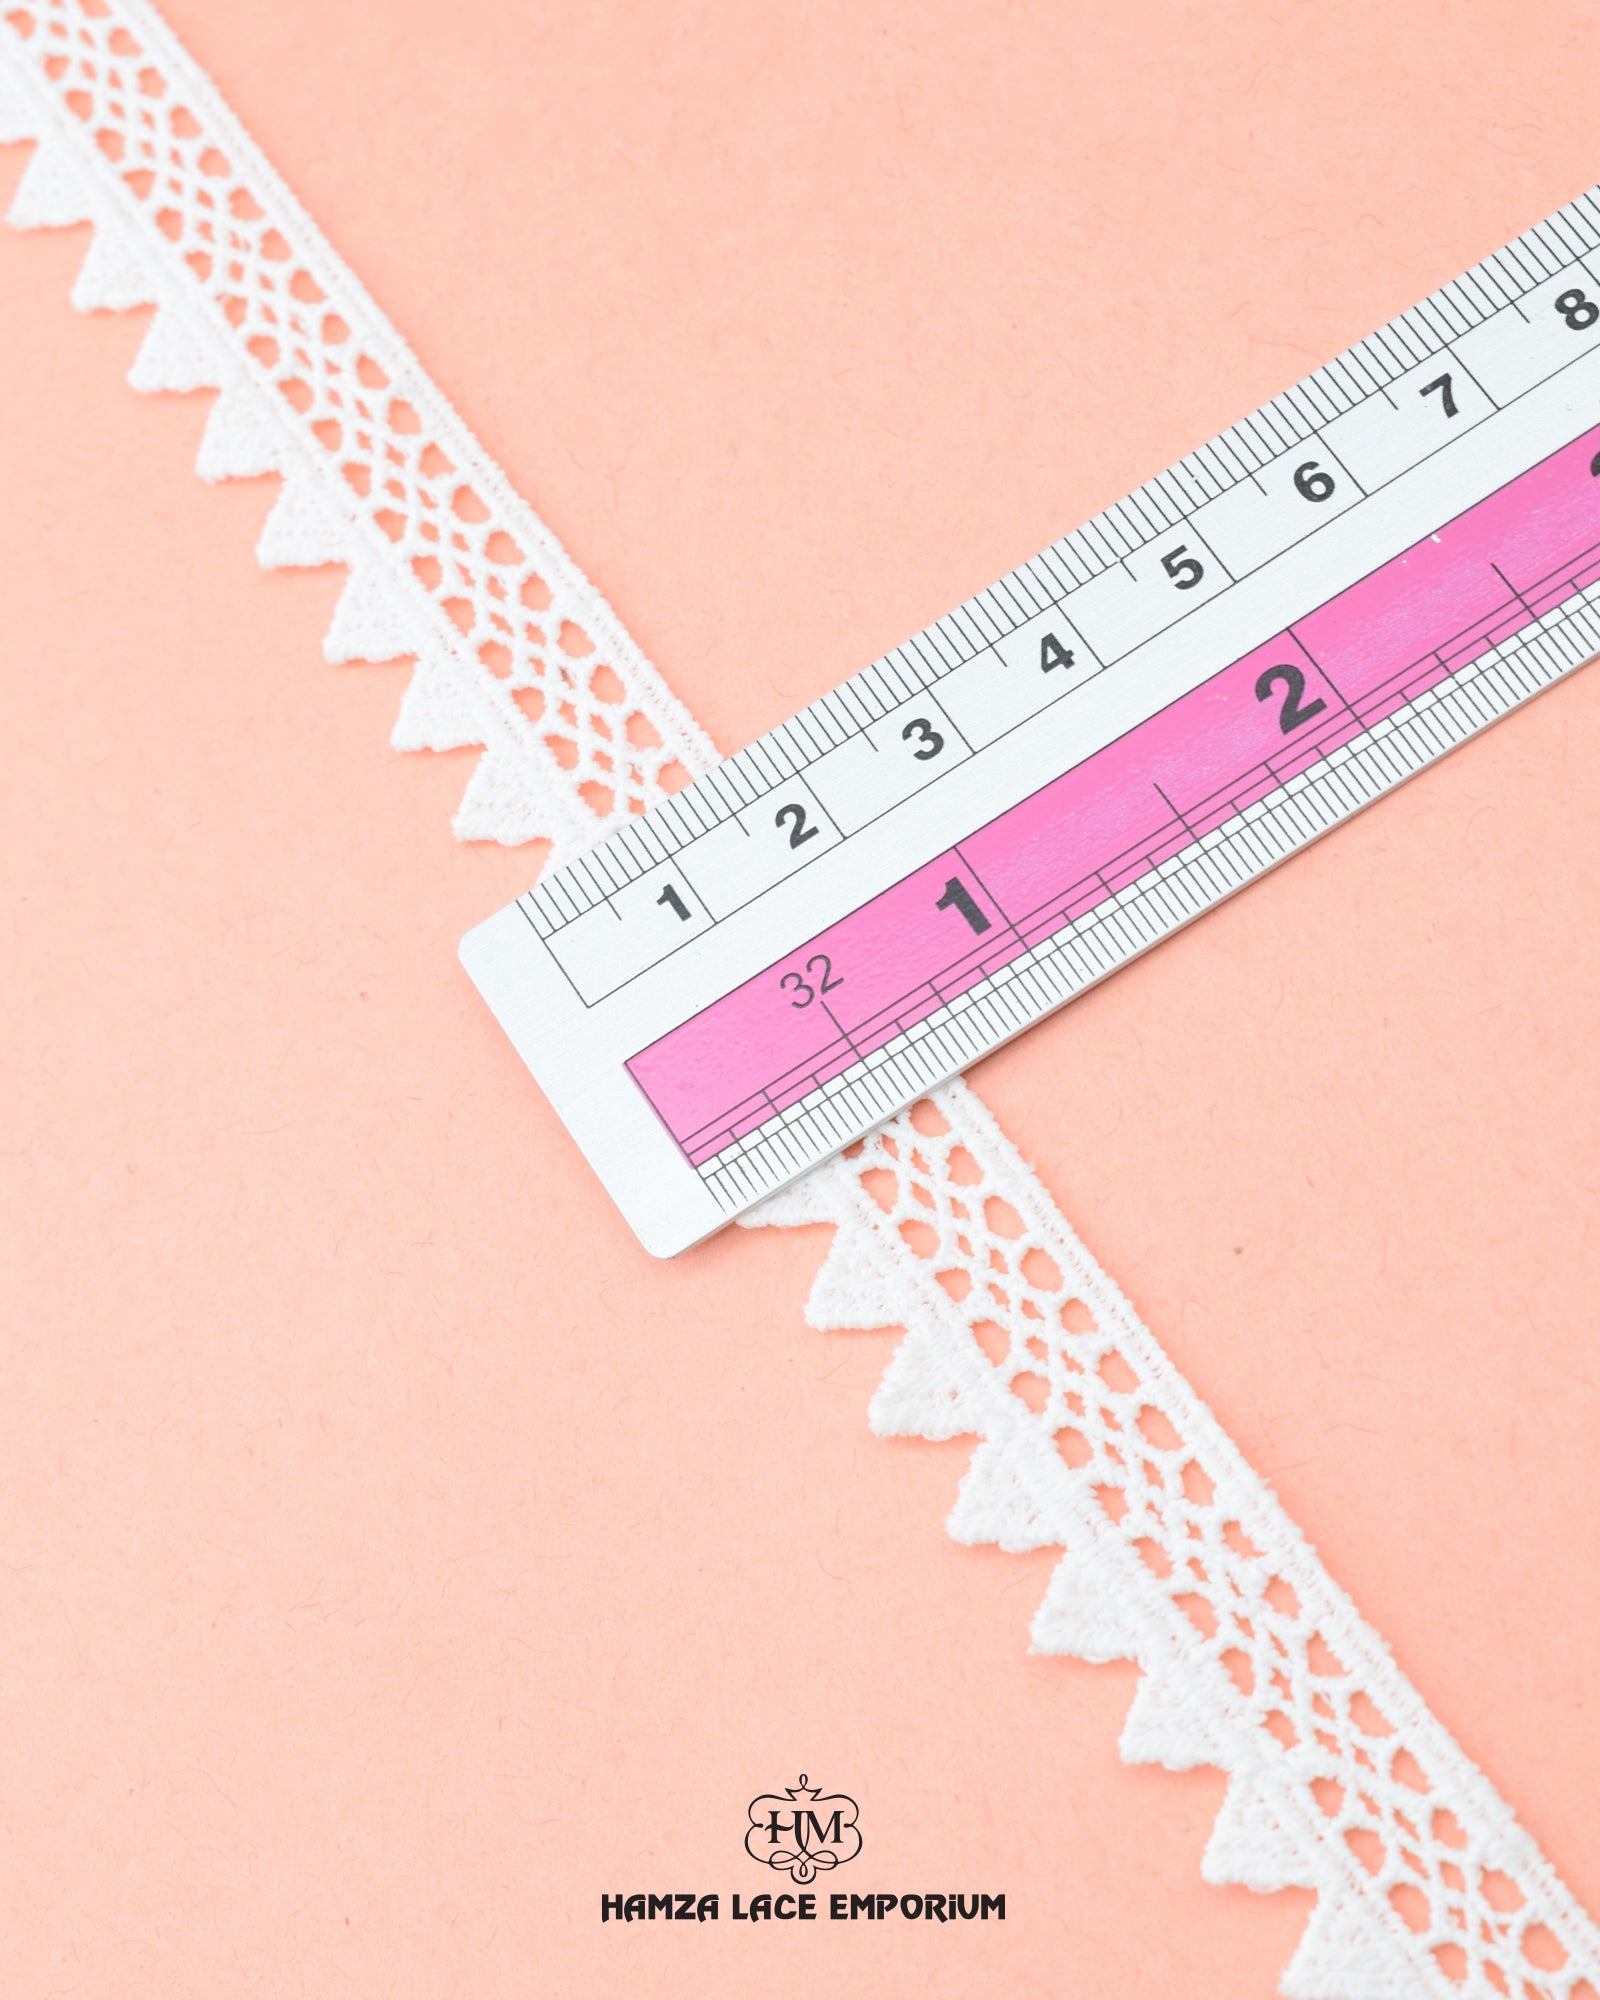 The size of the 'Edging Samosa Lace 2360' is given with the help of a ruler.